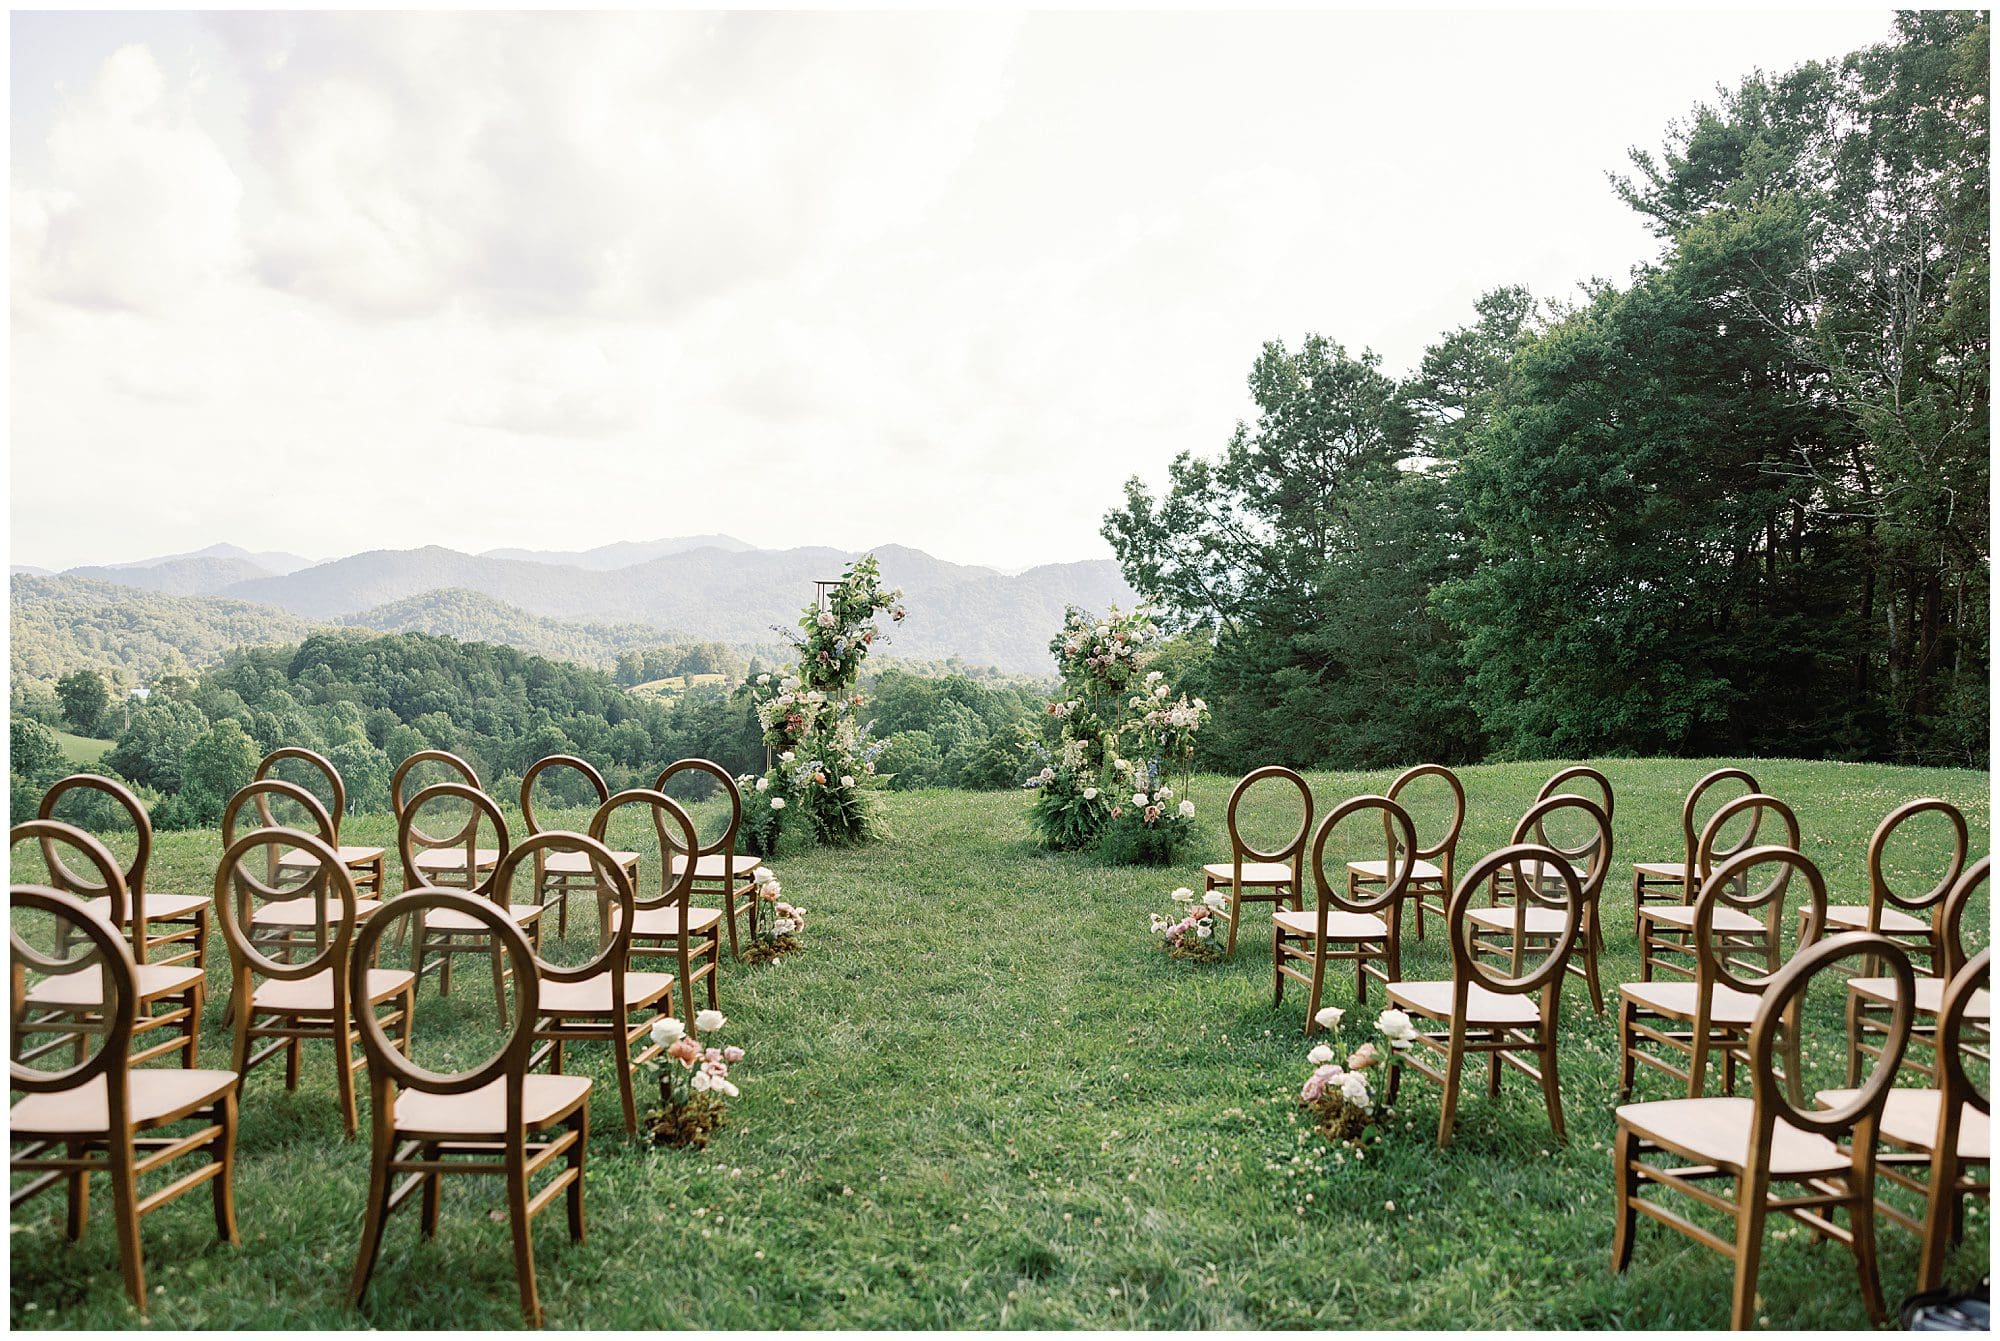 A Parisian-inspired summer wedding ceremony set up in a grassy field with mountains in the background at The Ridge.